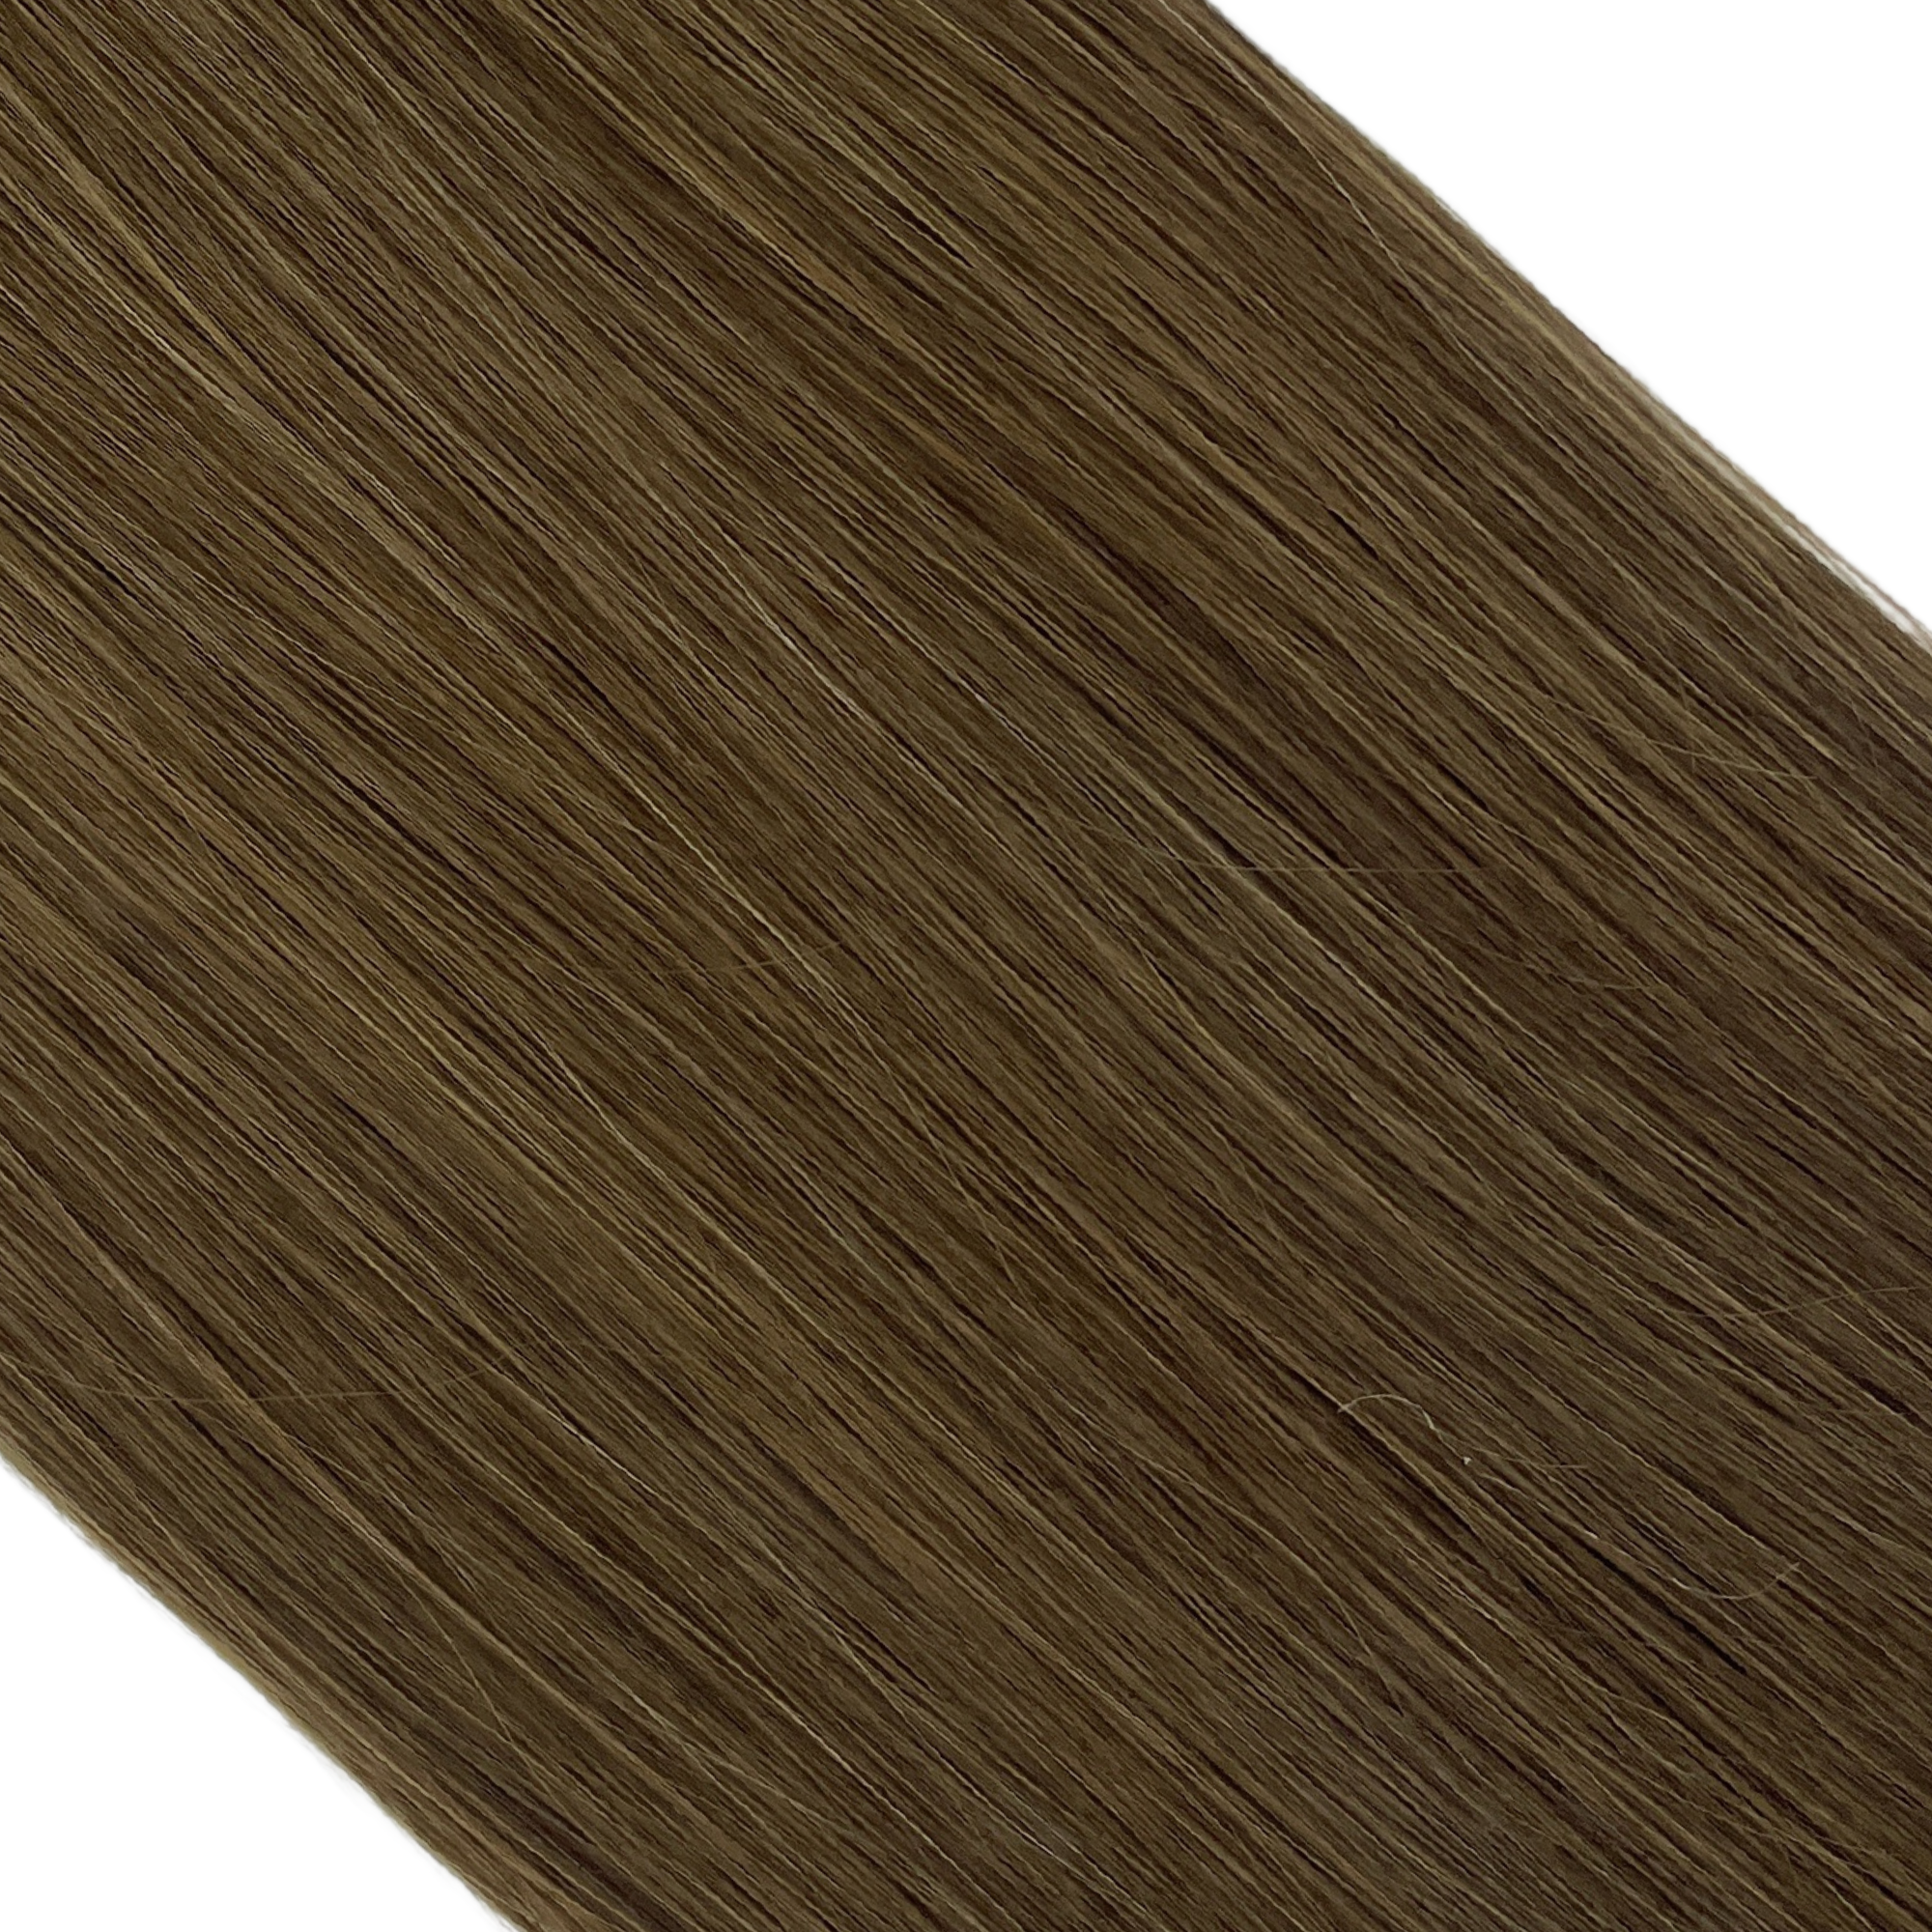 "hair rehab london 18" tape hair extensions shade swatch titled smoky brunette"